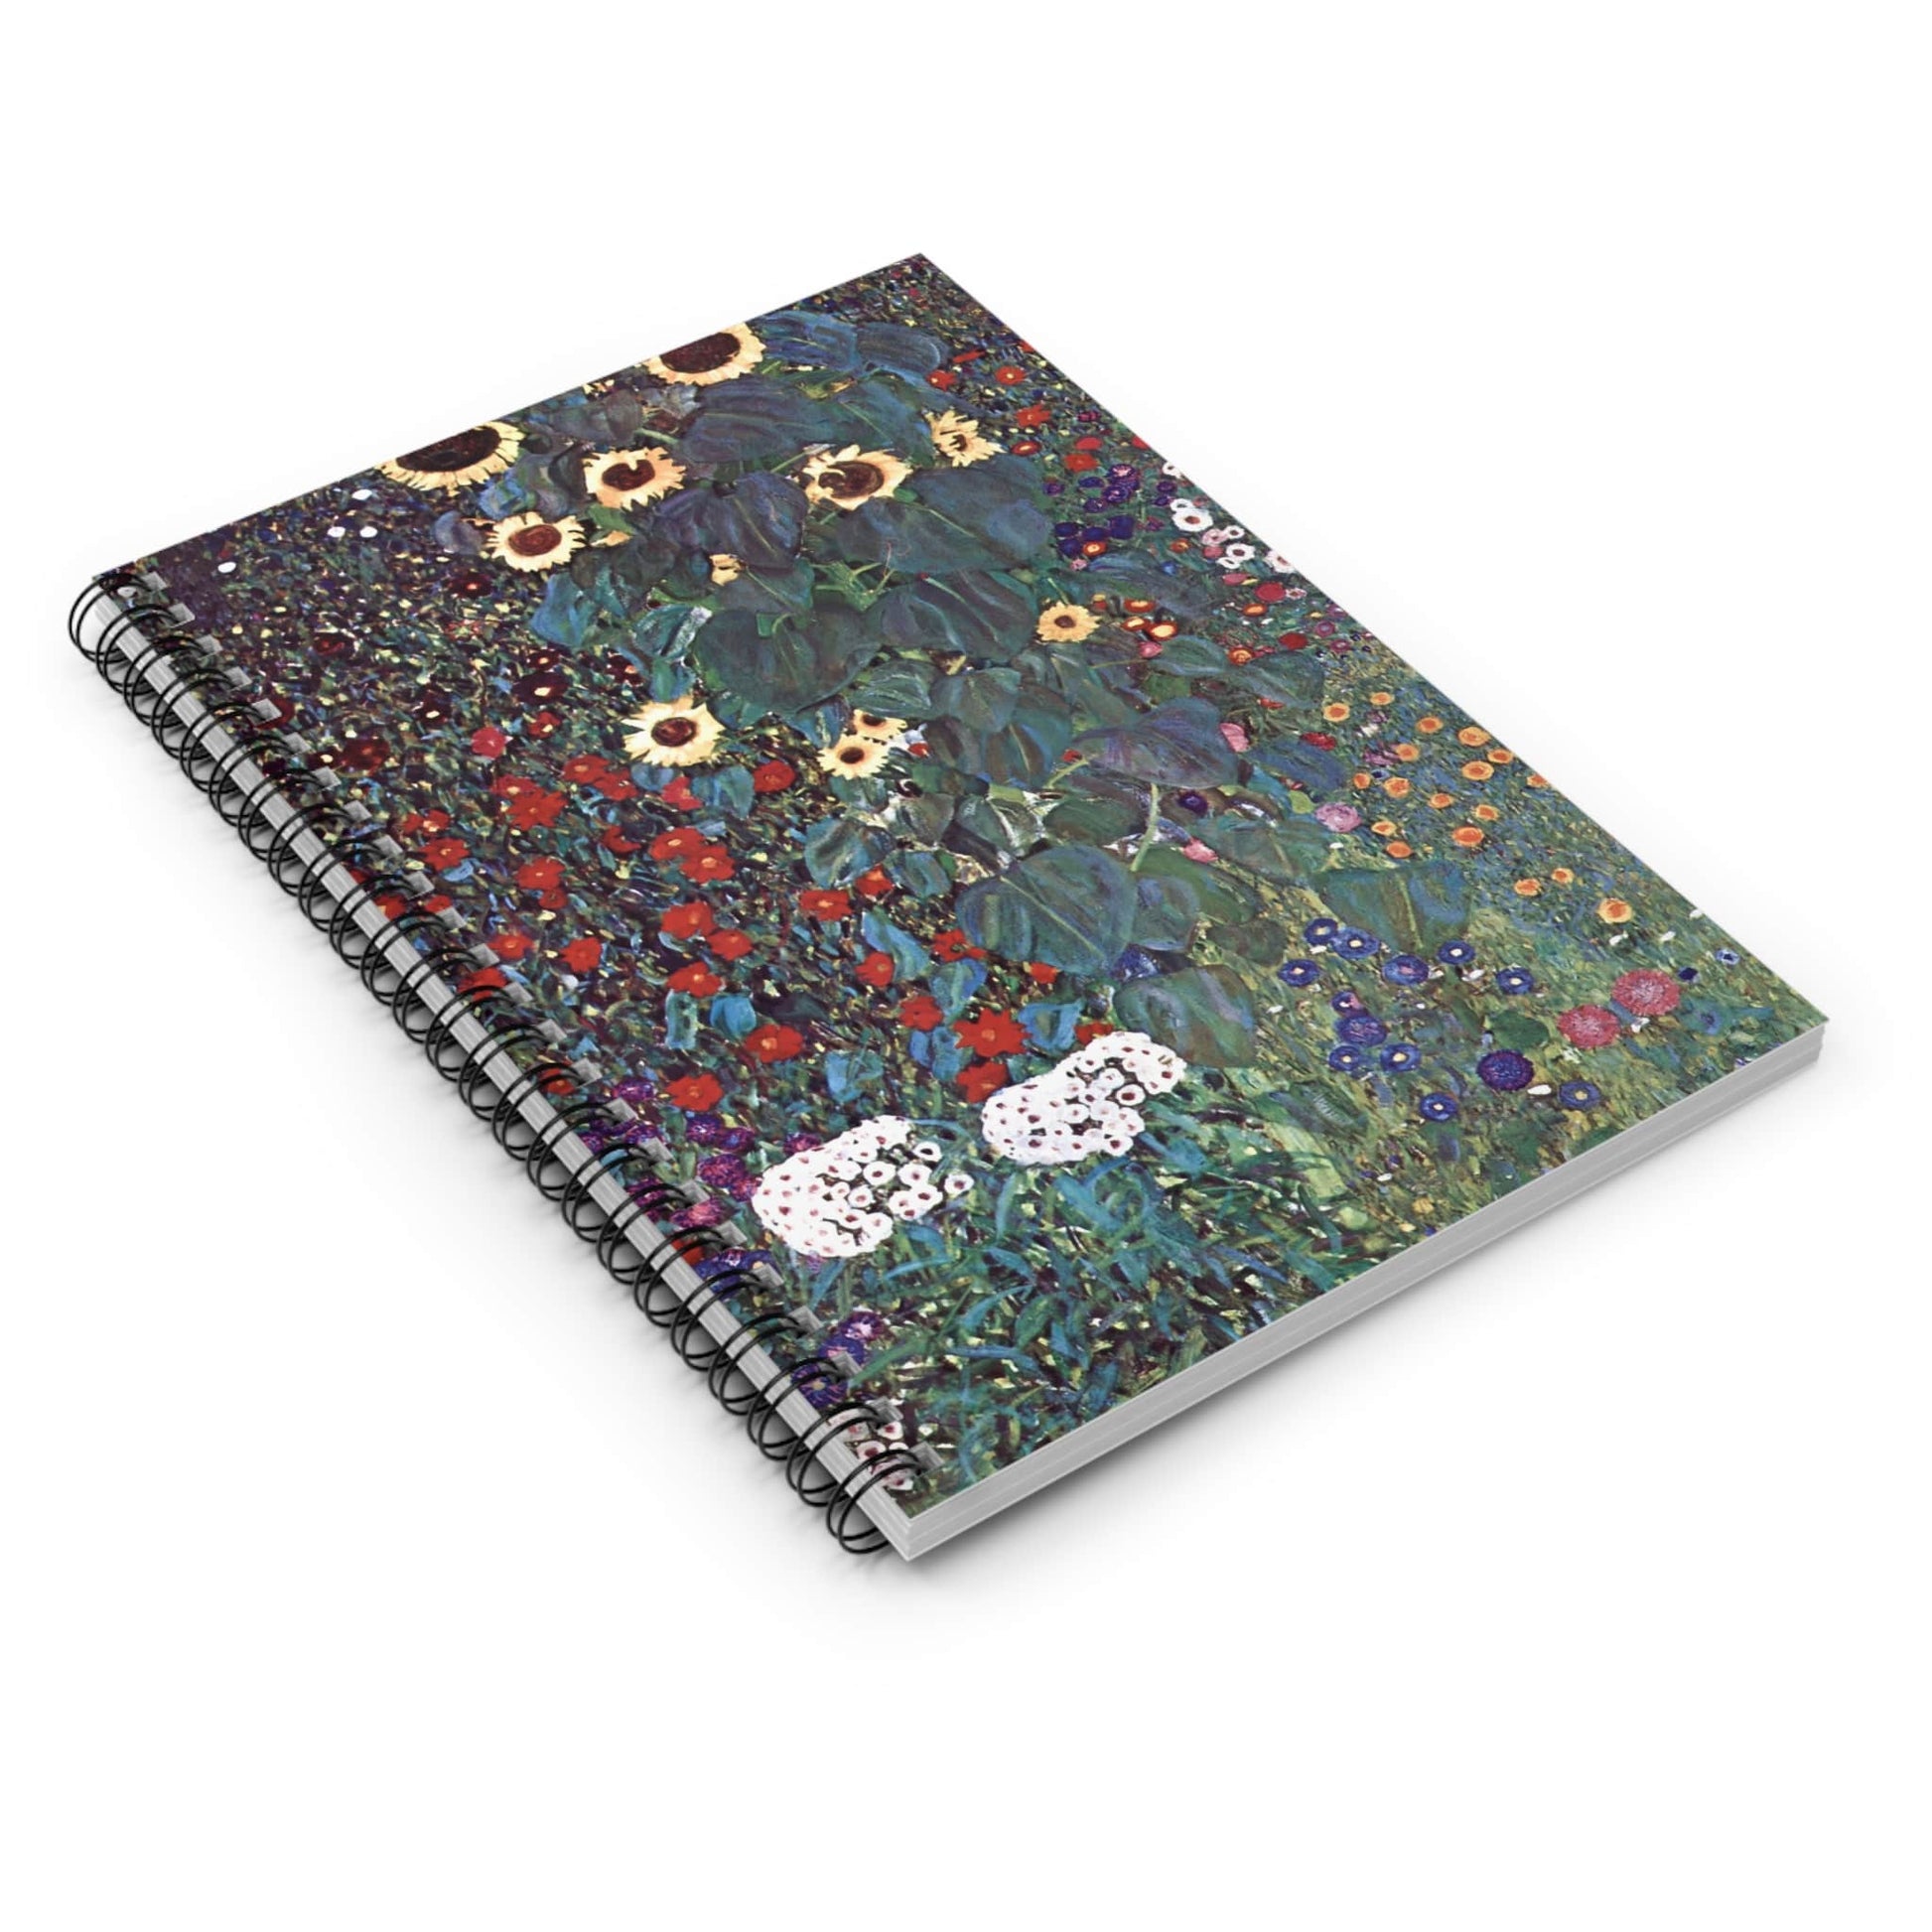 Boho Flower Painting Spiral Notebook Laying Flat on White Surface